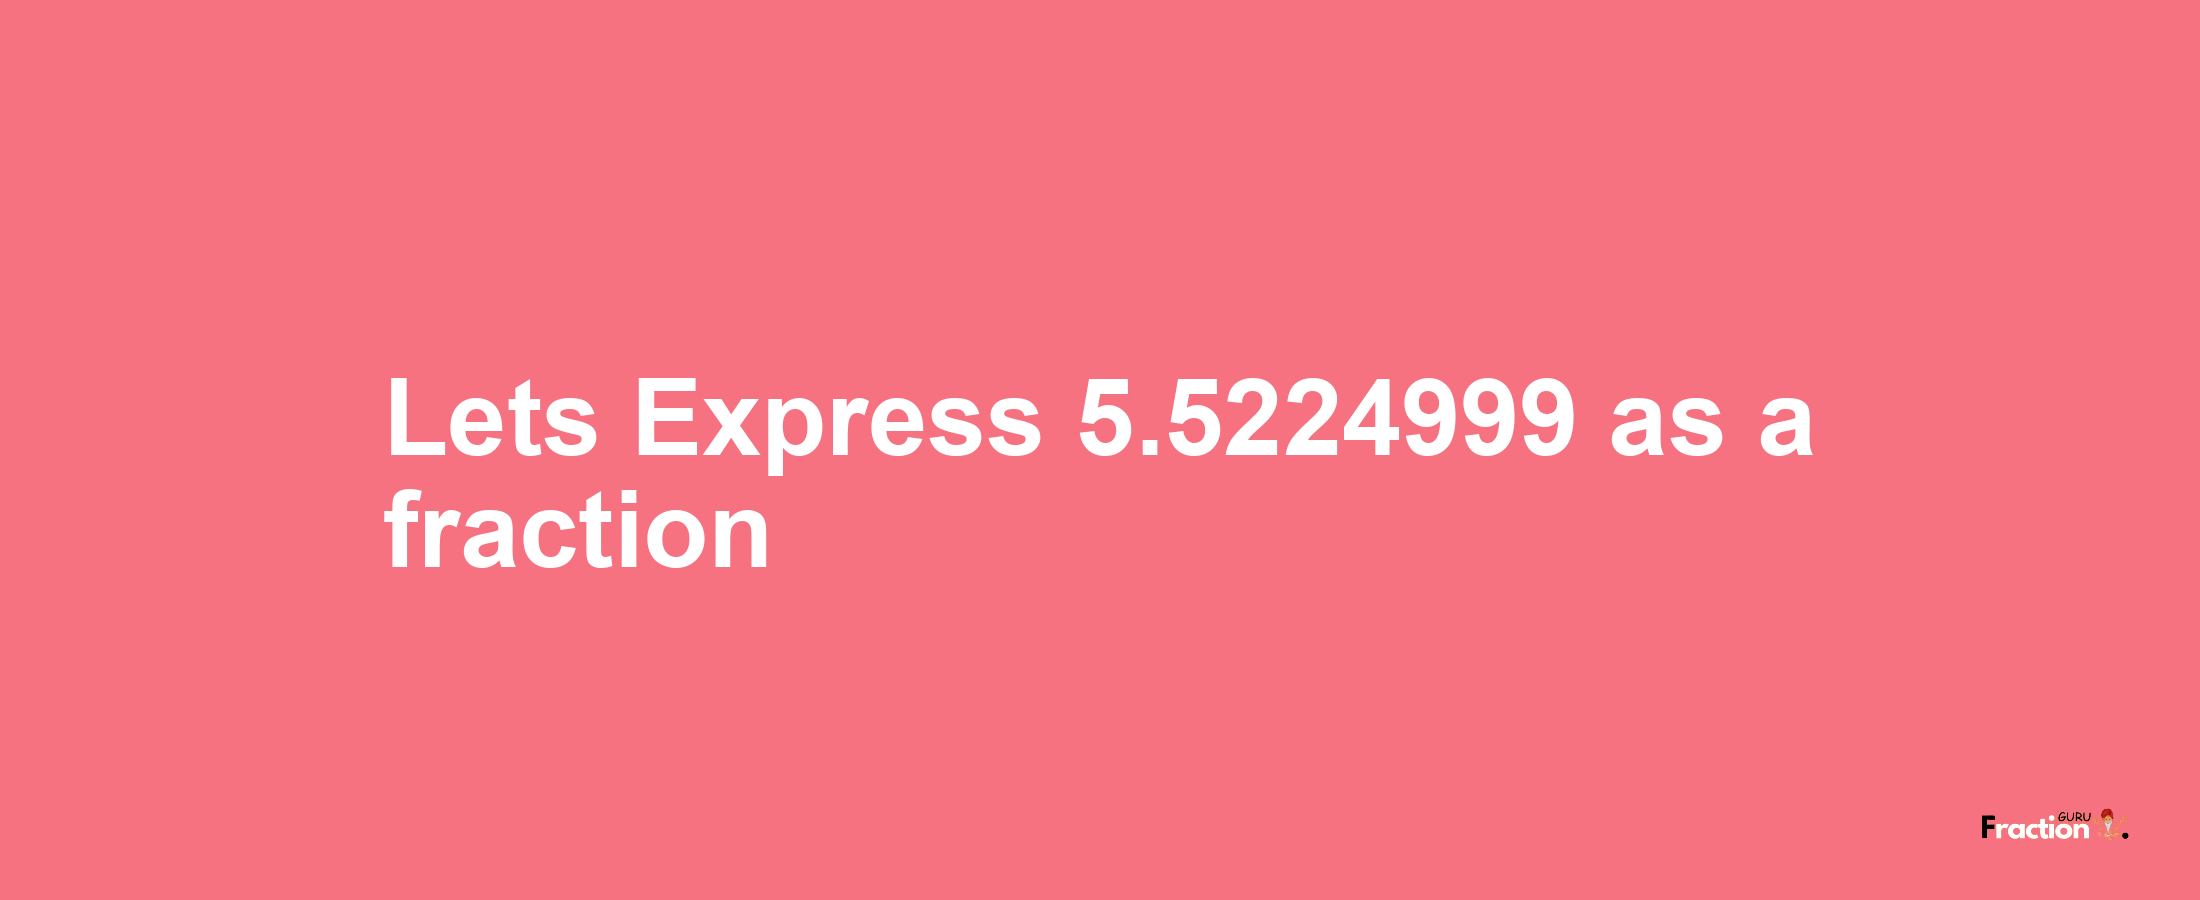 Lets Express 5.5224999 as afraction